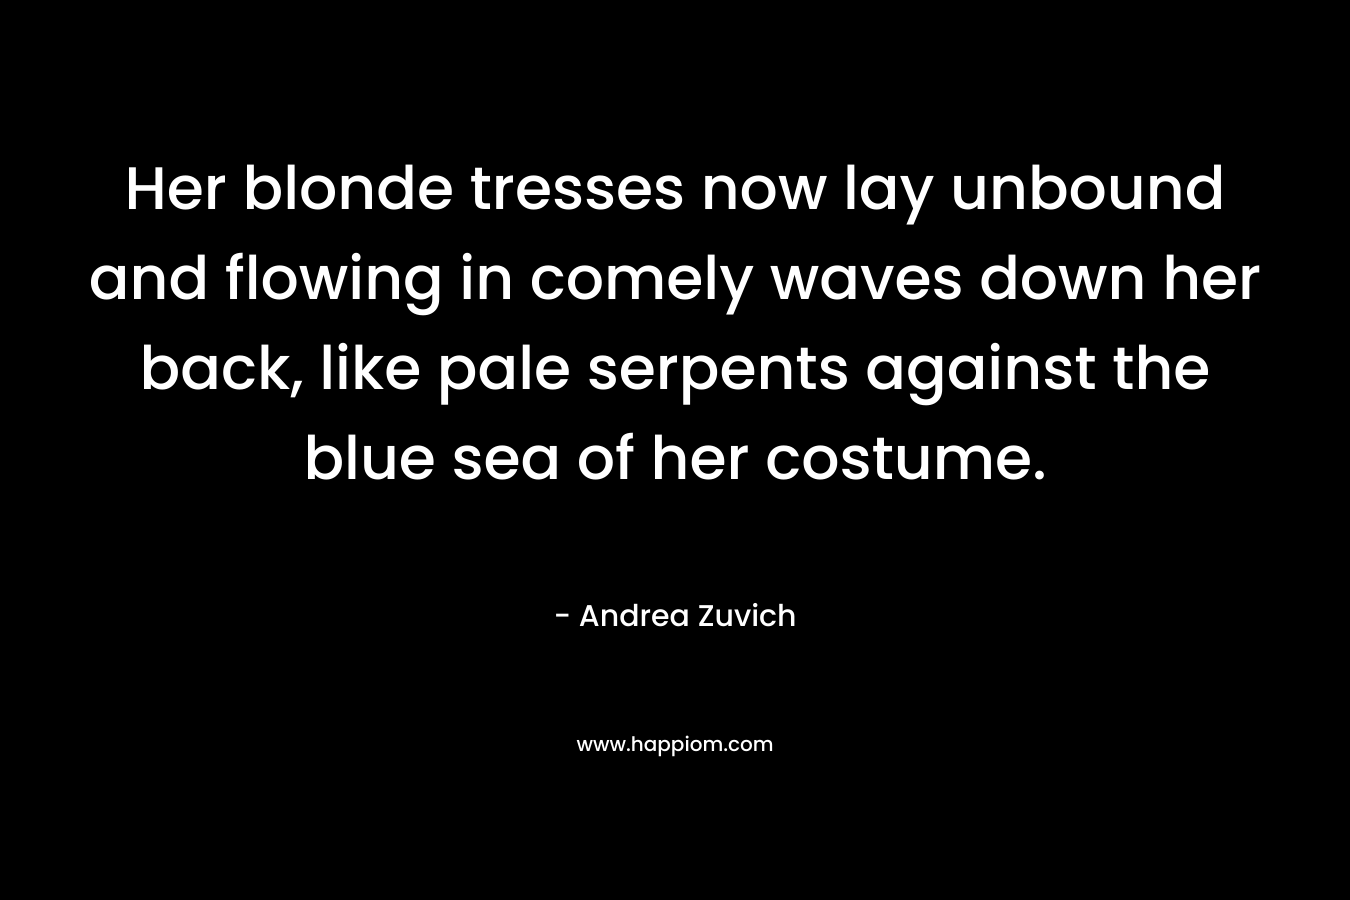 Her blonde tresses now lay unbound and flowing in comely waves down her back, like pale serpents against the blue sea of her costume. – Andrea Zuvich